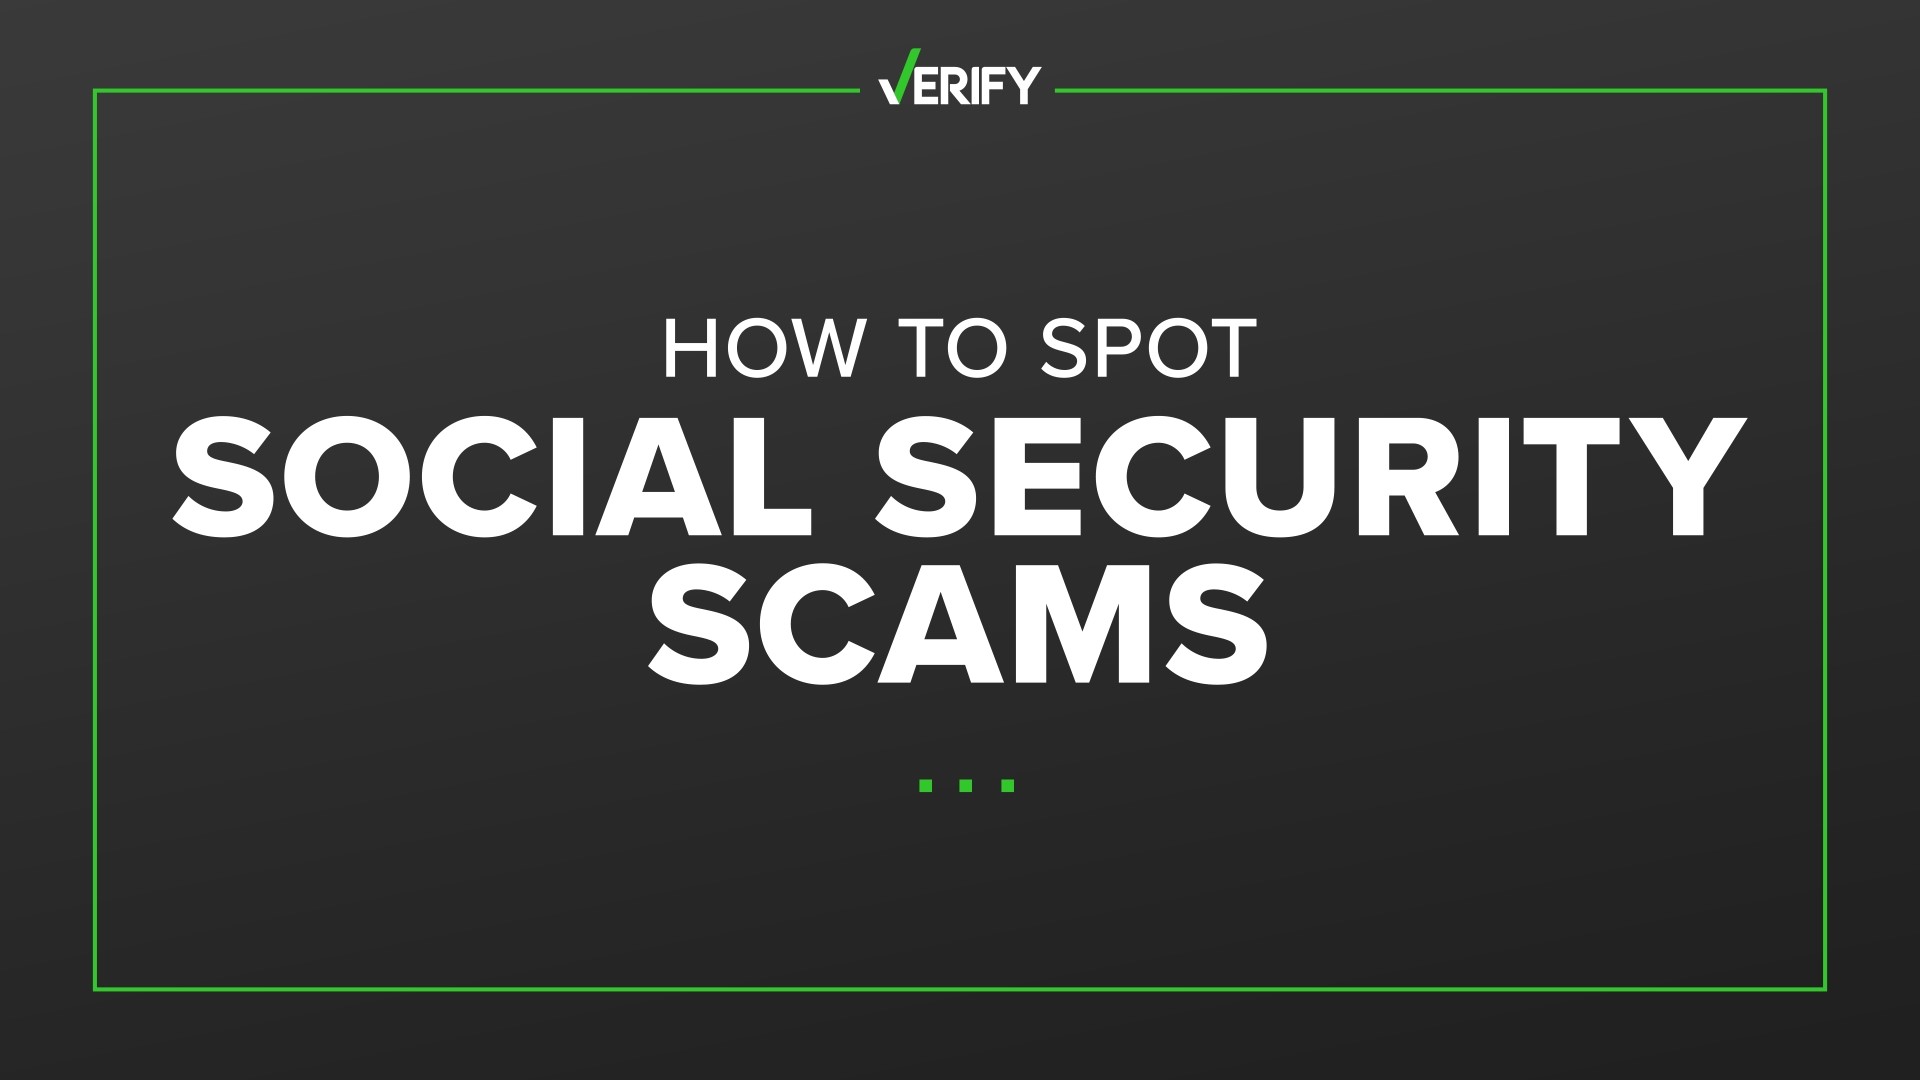 Social Security scams are common. From email, text and call scams, here’s how to avoid identity theft and losing money.